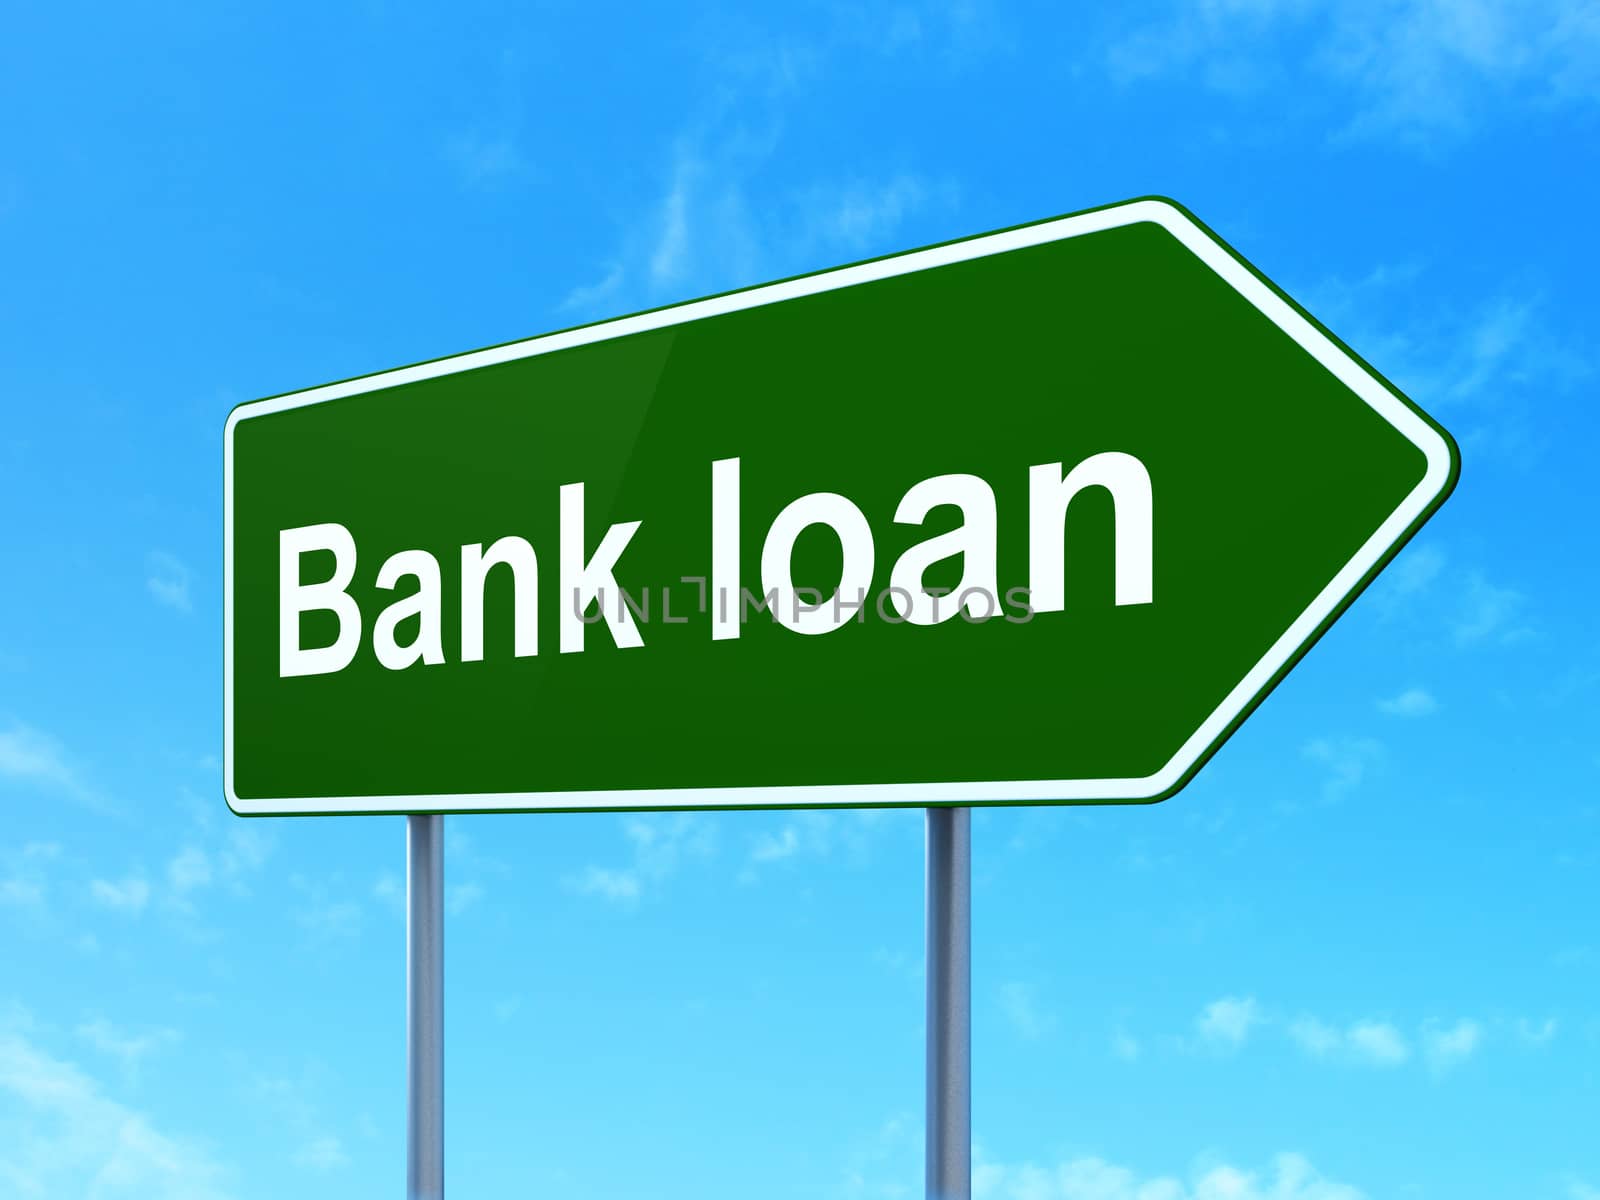 Banking concept: Bank Loan on green road highway sign, clear blue sky background, 3D rendering